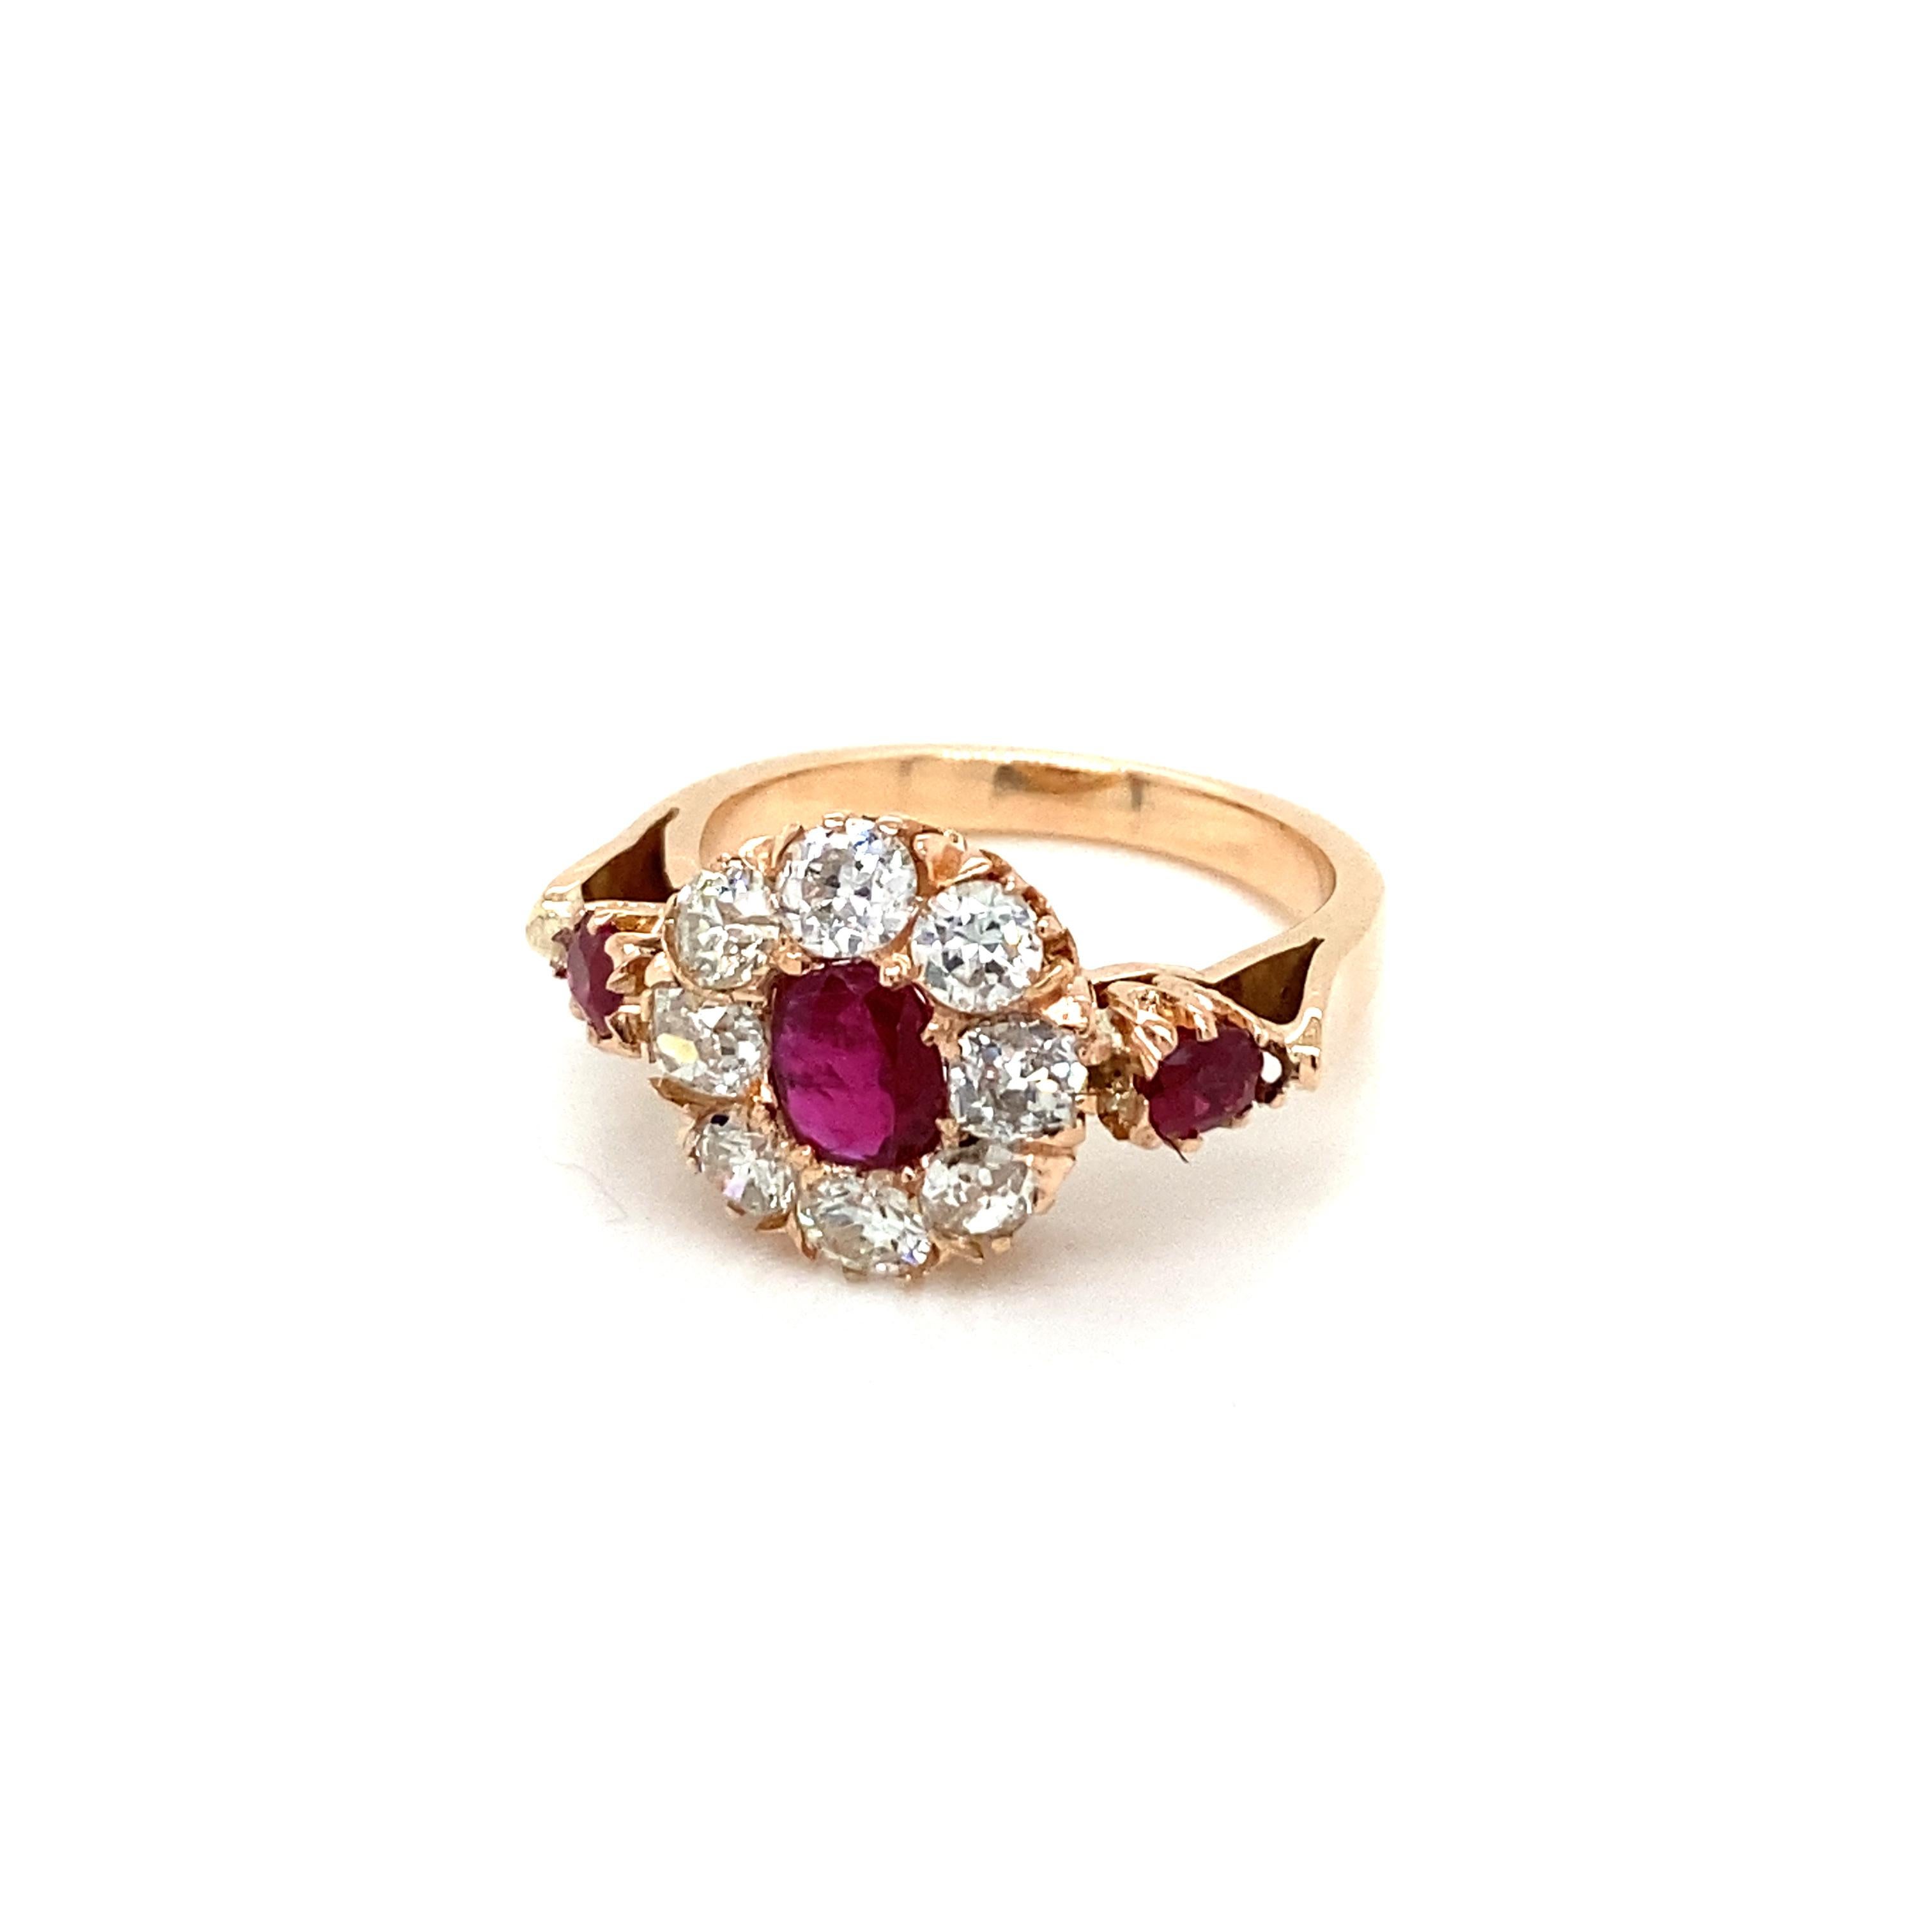 Beautiful 1800' engagement ring.
It features in the center a large Natural Burmese Ruby weight 0,50 carat, surrounded by an halo of sparkling Old mine cut Diamond weighing 1.35 carats, graded H/I color Vs clarity, and enriched by two smaller rubies